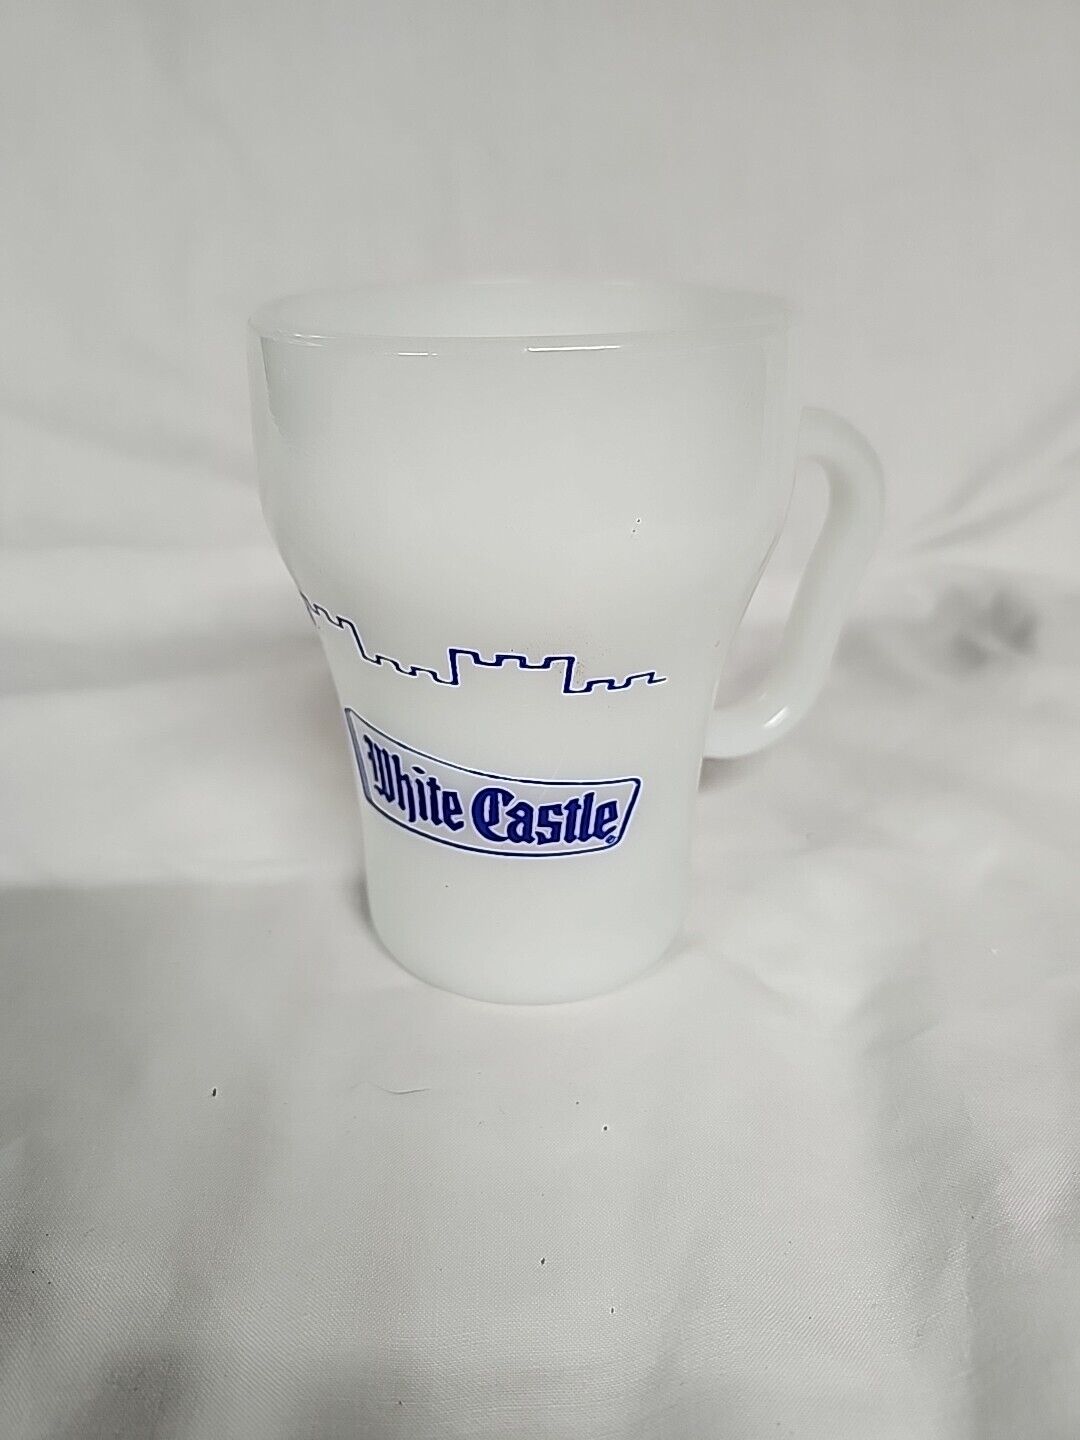 VINTAGE ANCHOR HOCKING, FIRE KING, WHITE CASTLE COFFEE MUG, OVEN-PROOF MADE USA